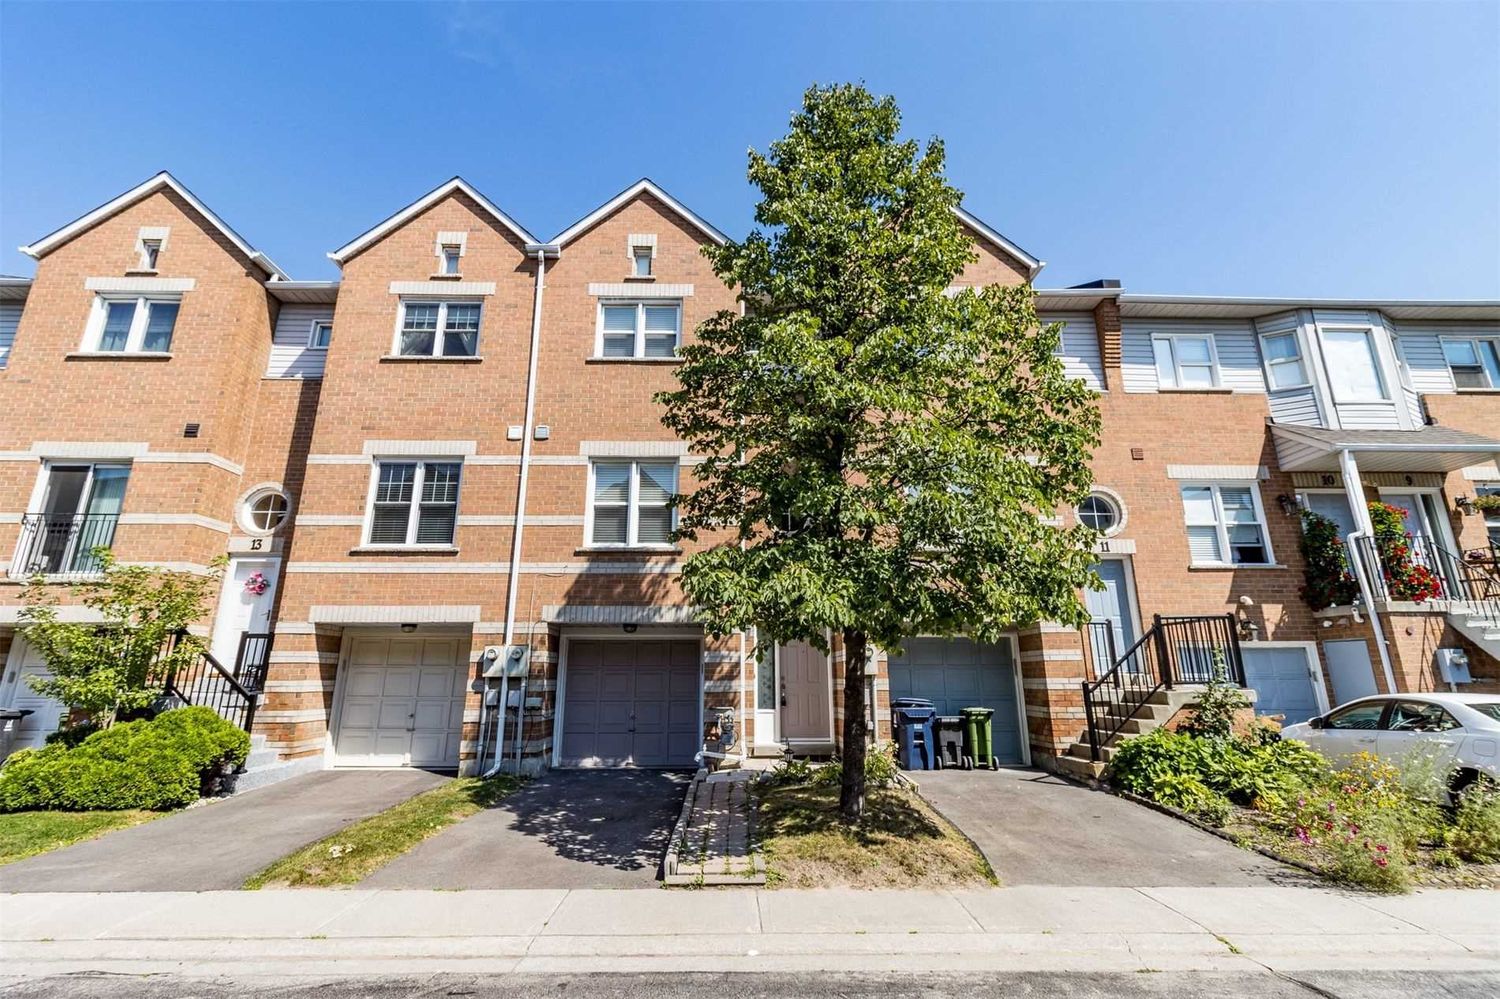 630 Evans Avenue. 630 Evans Avenue Townhomes is located in  Etobicoke, Toronto - image #1 of 3